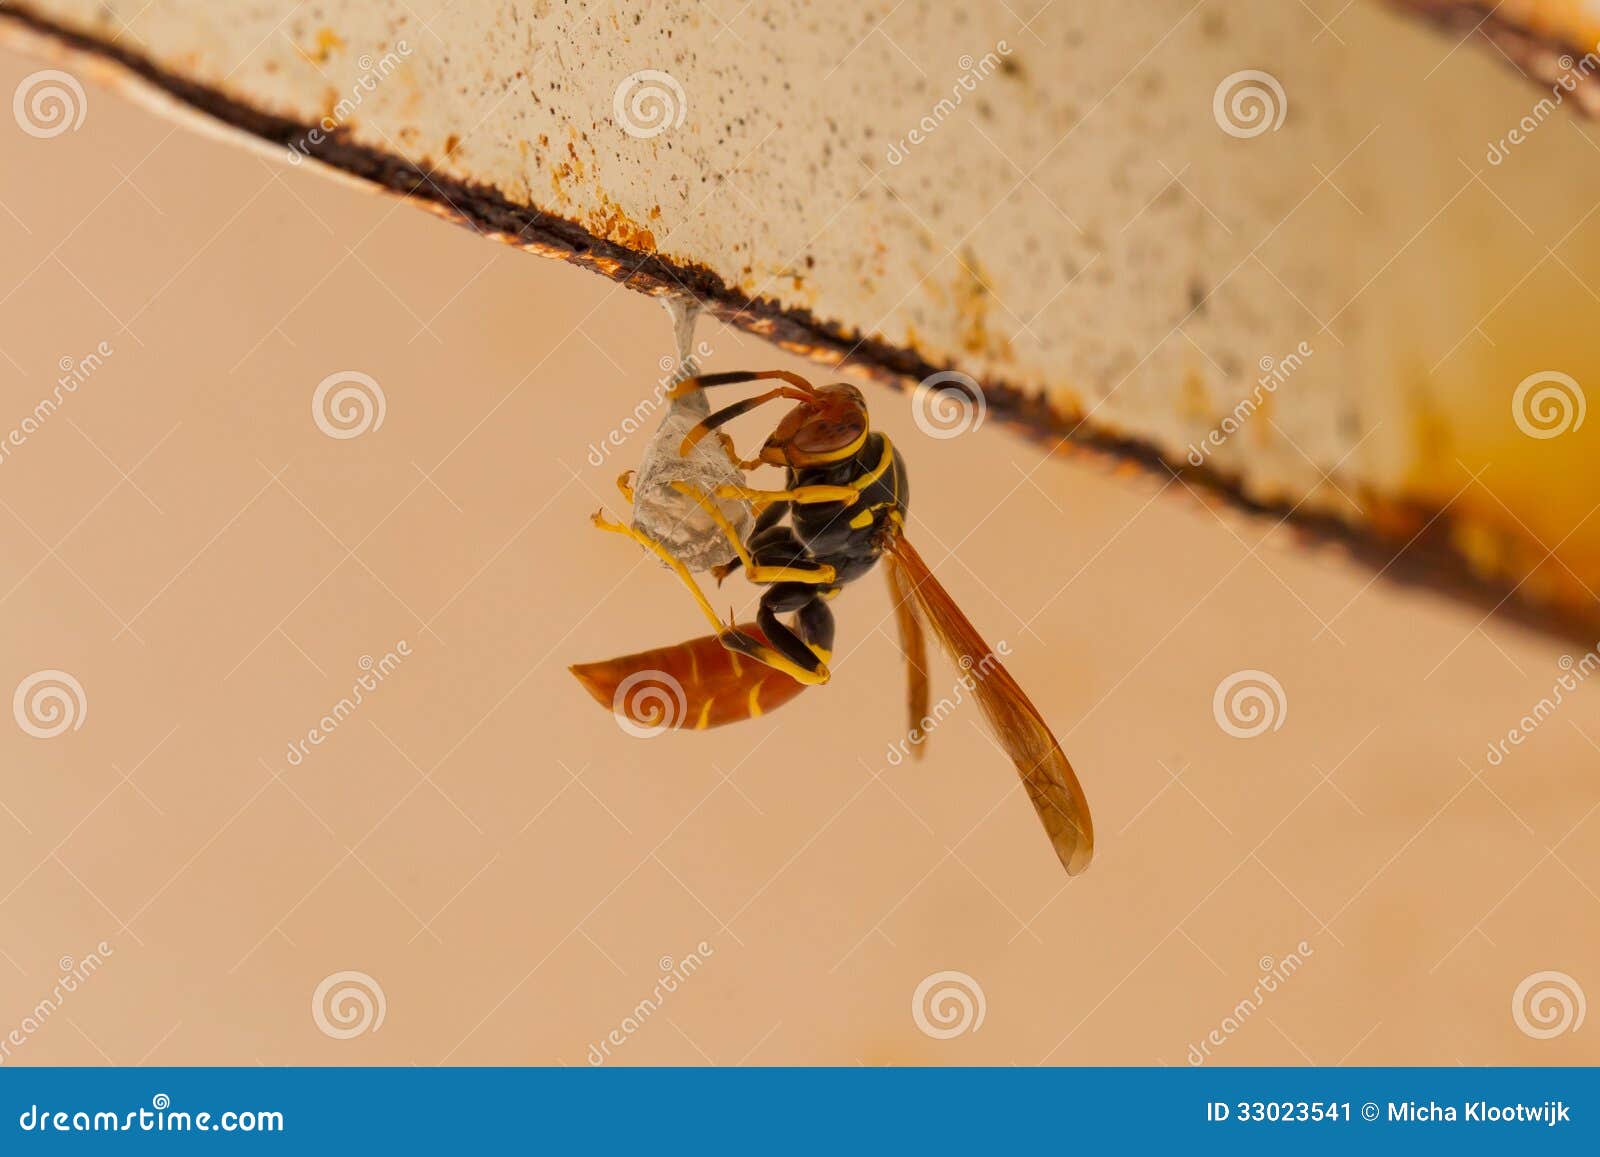 jack spaniard wasp building a small nest